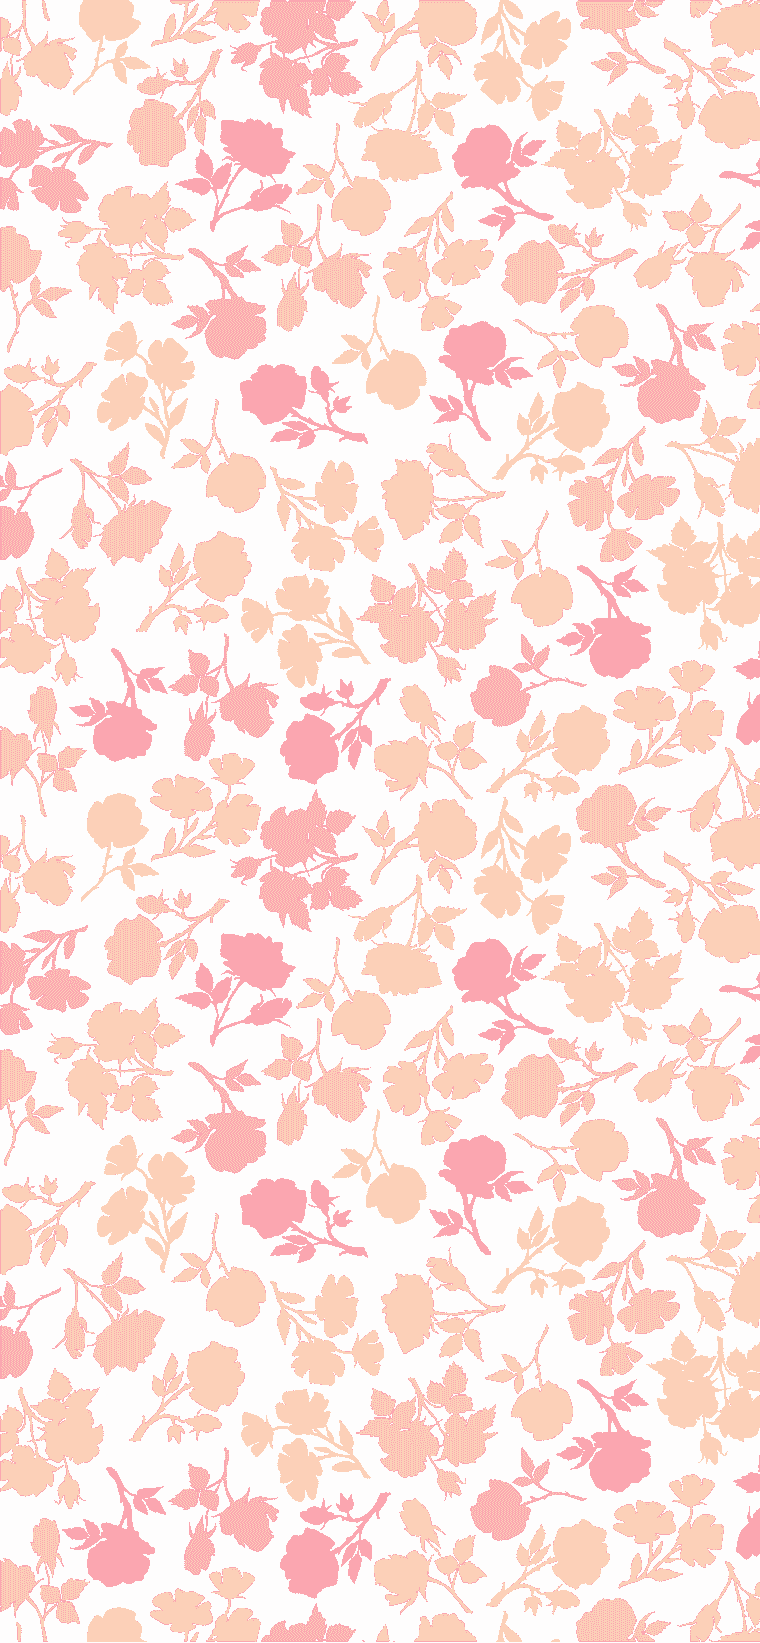 yellow pink and white flowers background png image